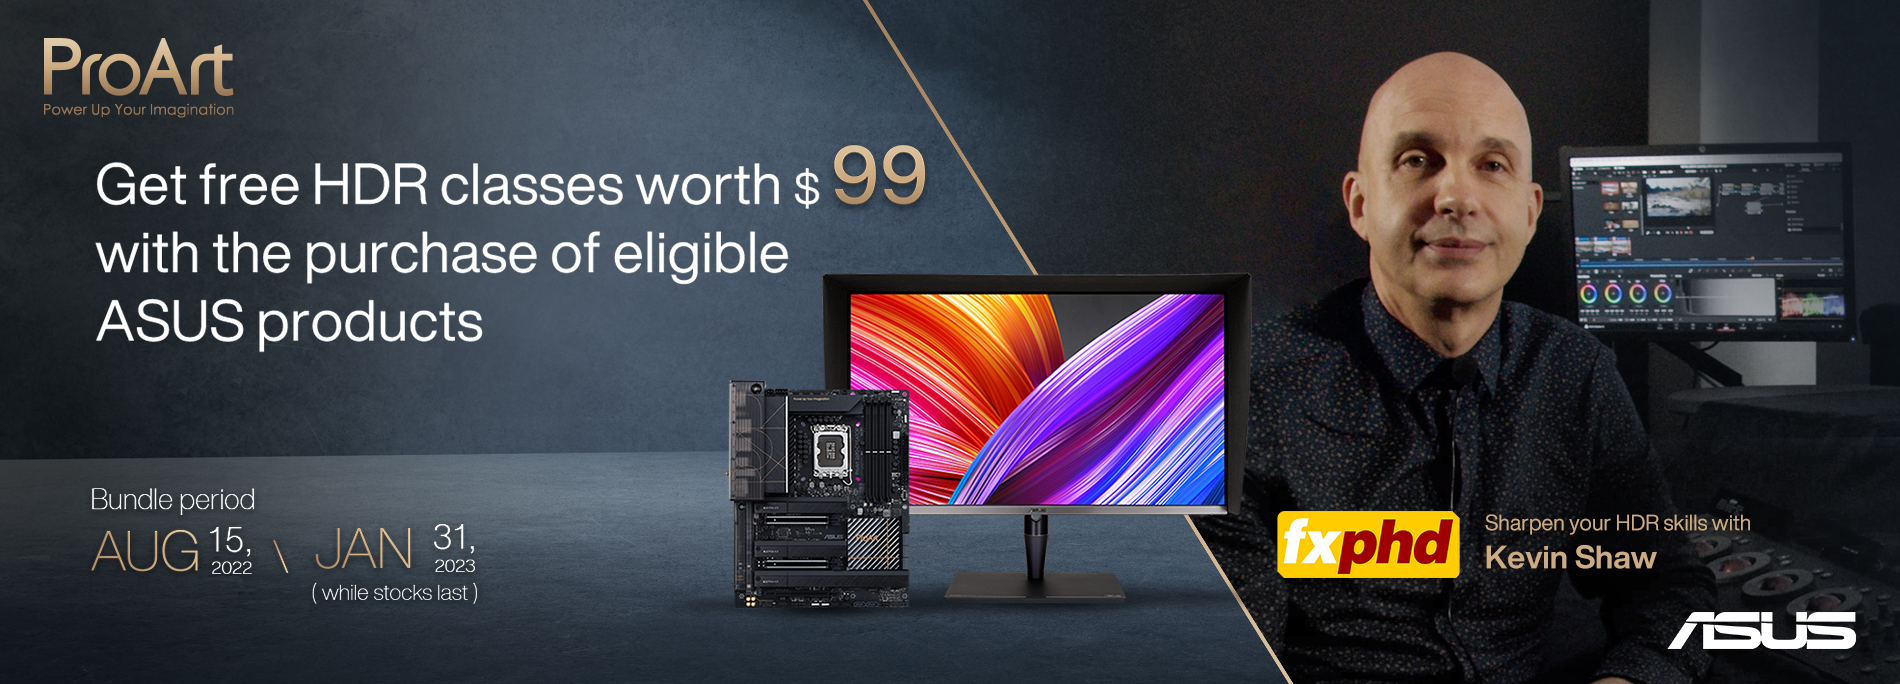 ASUS x fxphd - Get free HDR classes with the purchases of eligible products (EMEA)